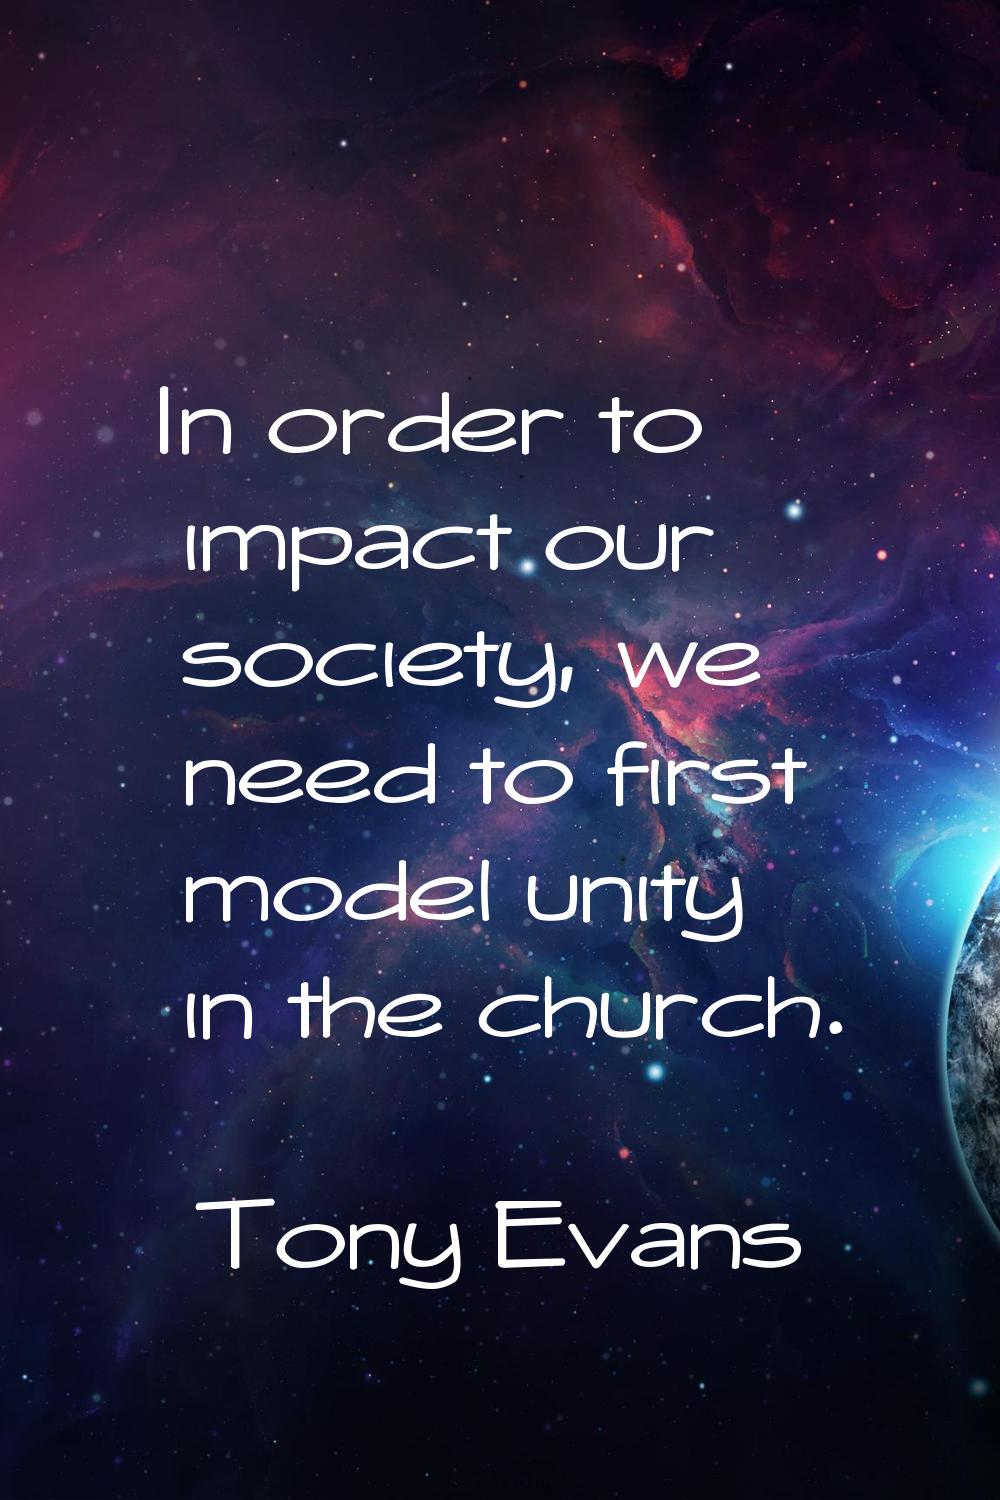 In order to impact our society, we need to first model unity in the church.